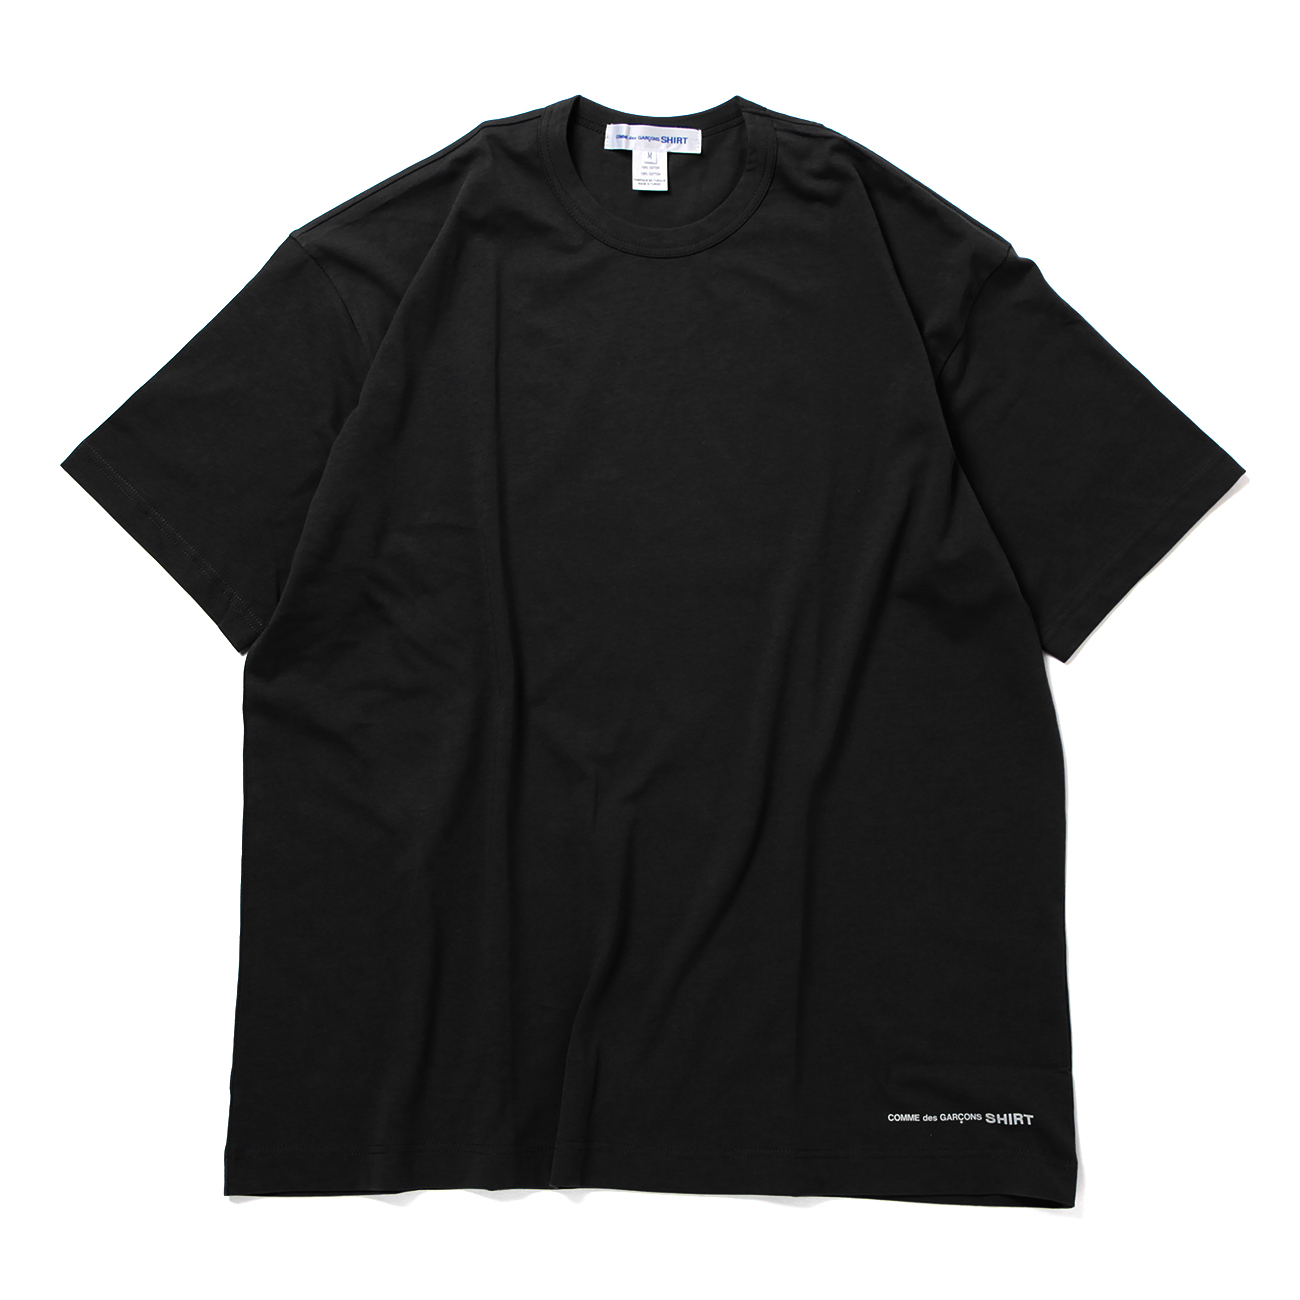 cotton jersey plain with printed CDG SHIRT logo at front - Black